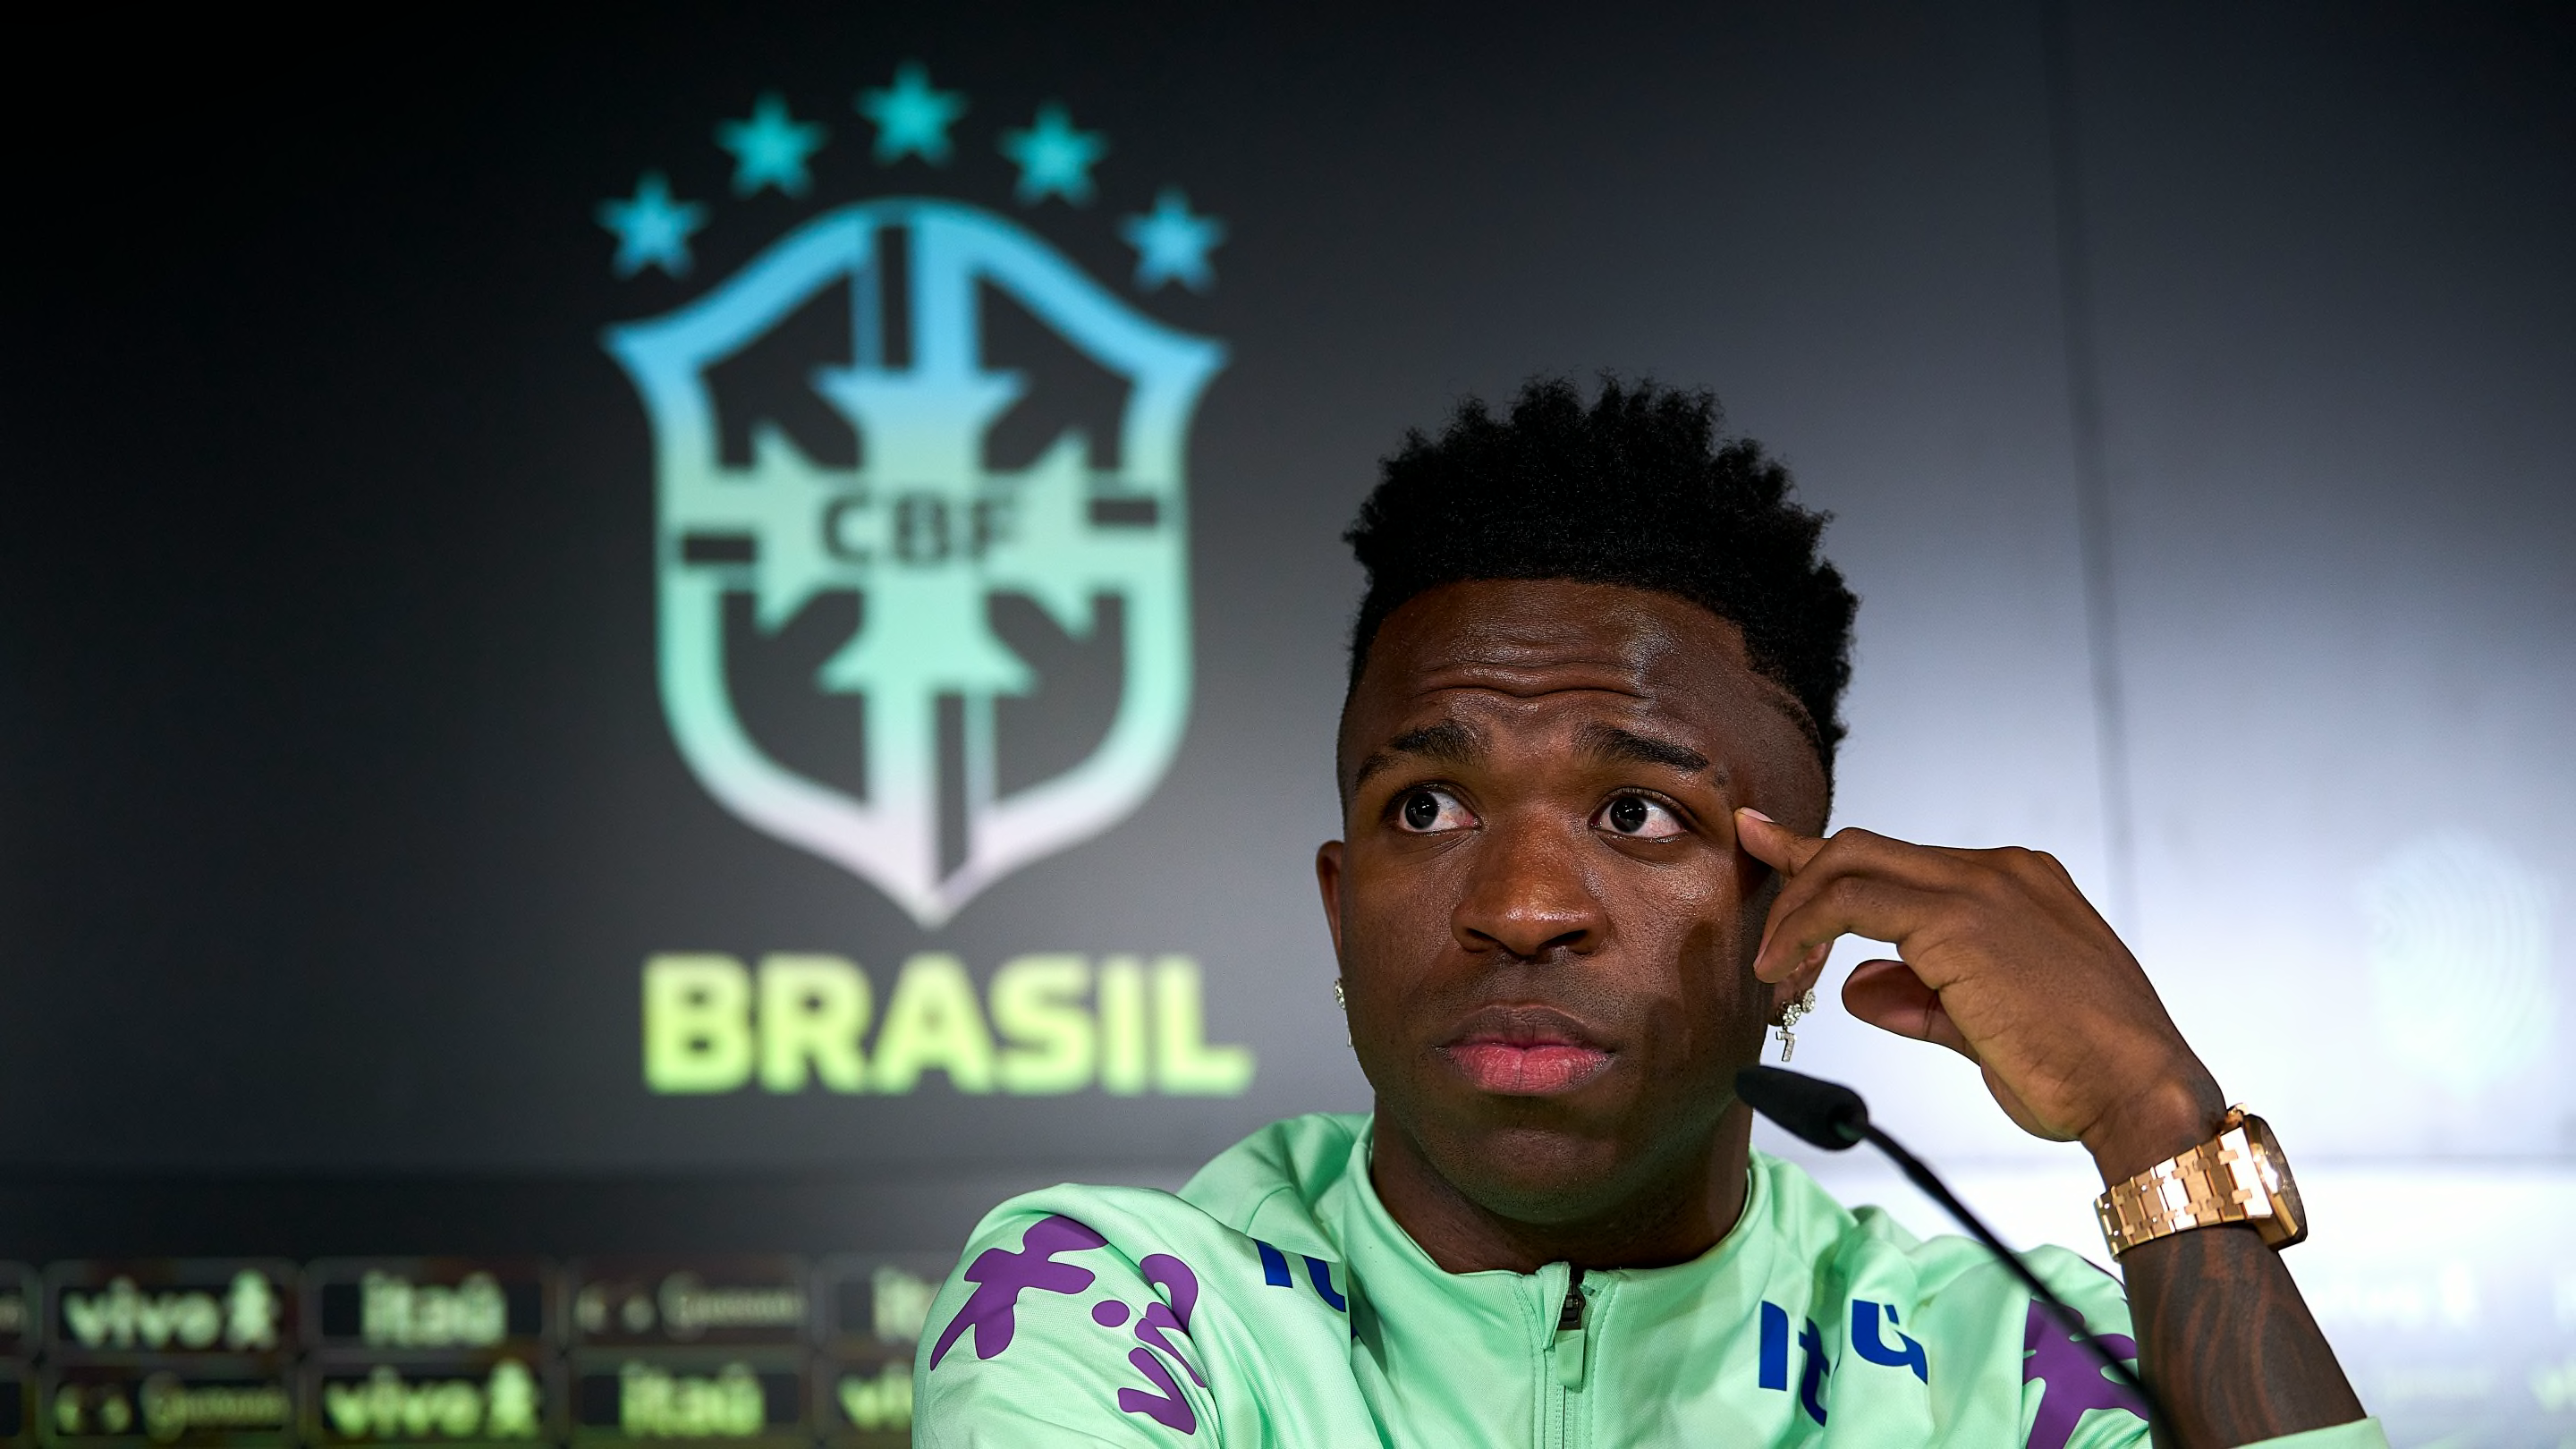 Vinicius Junior breaks down in tears discussing racism during press conference